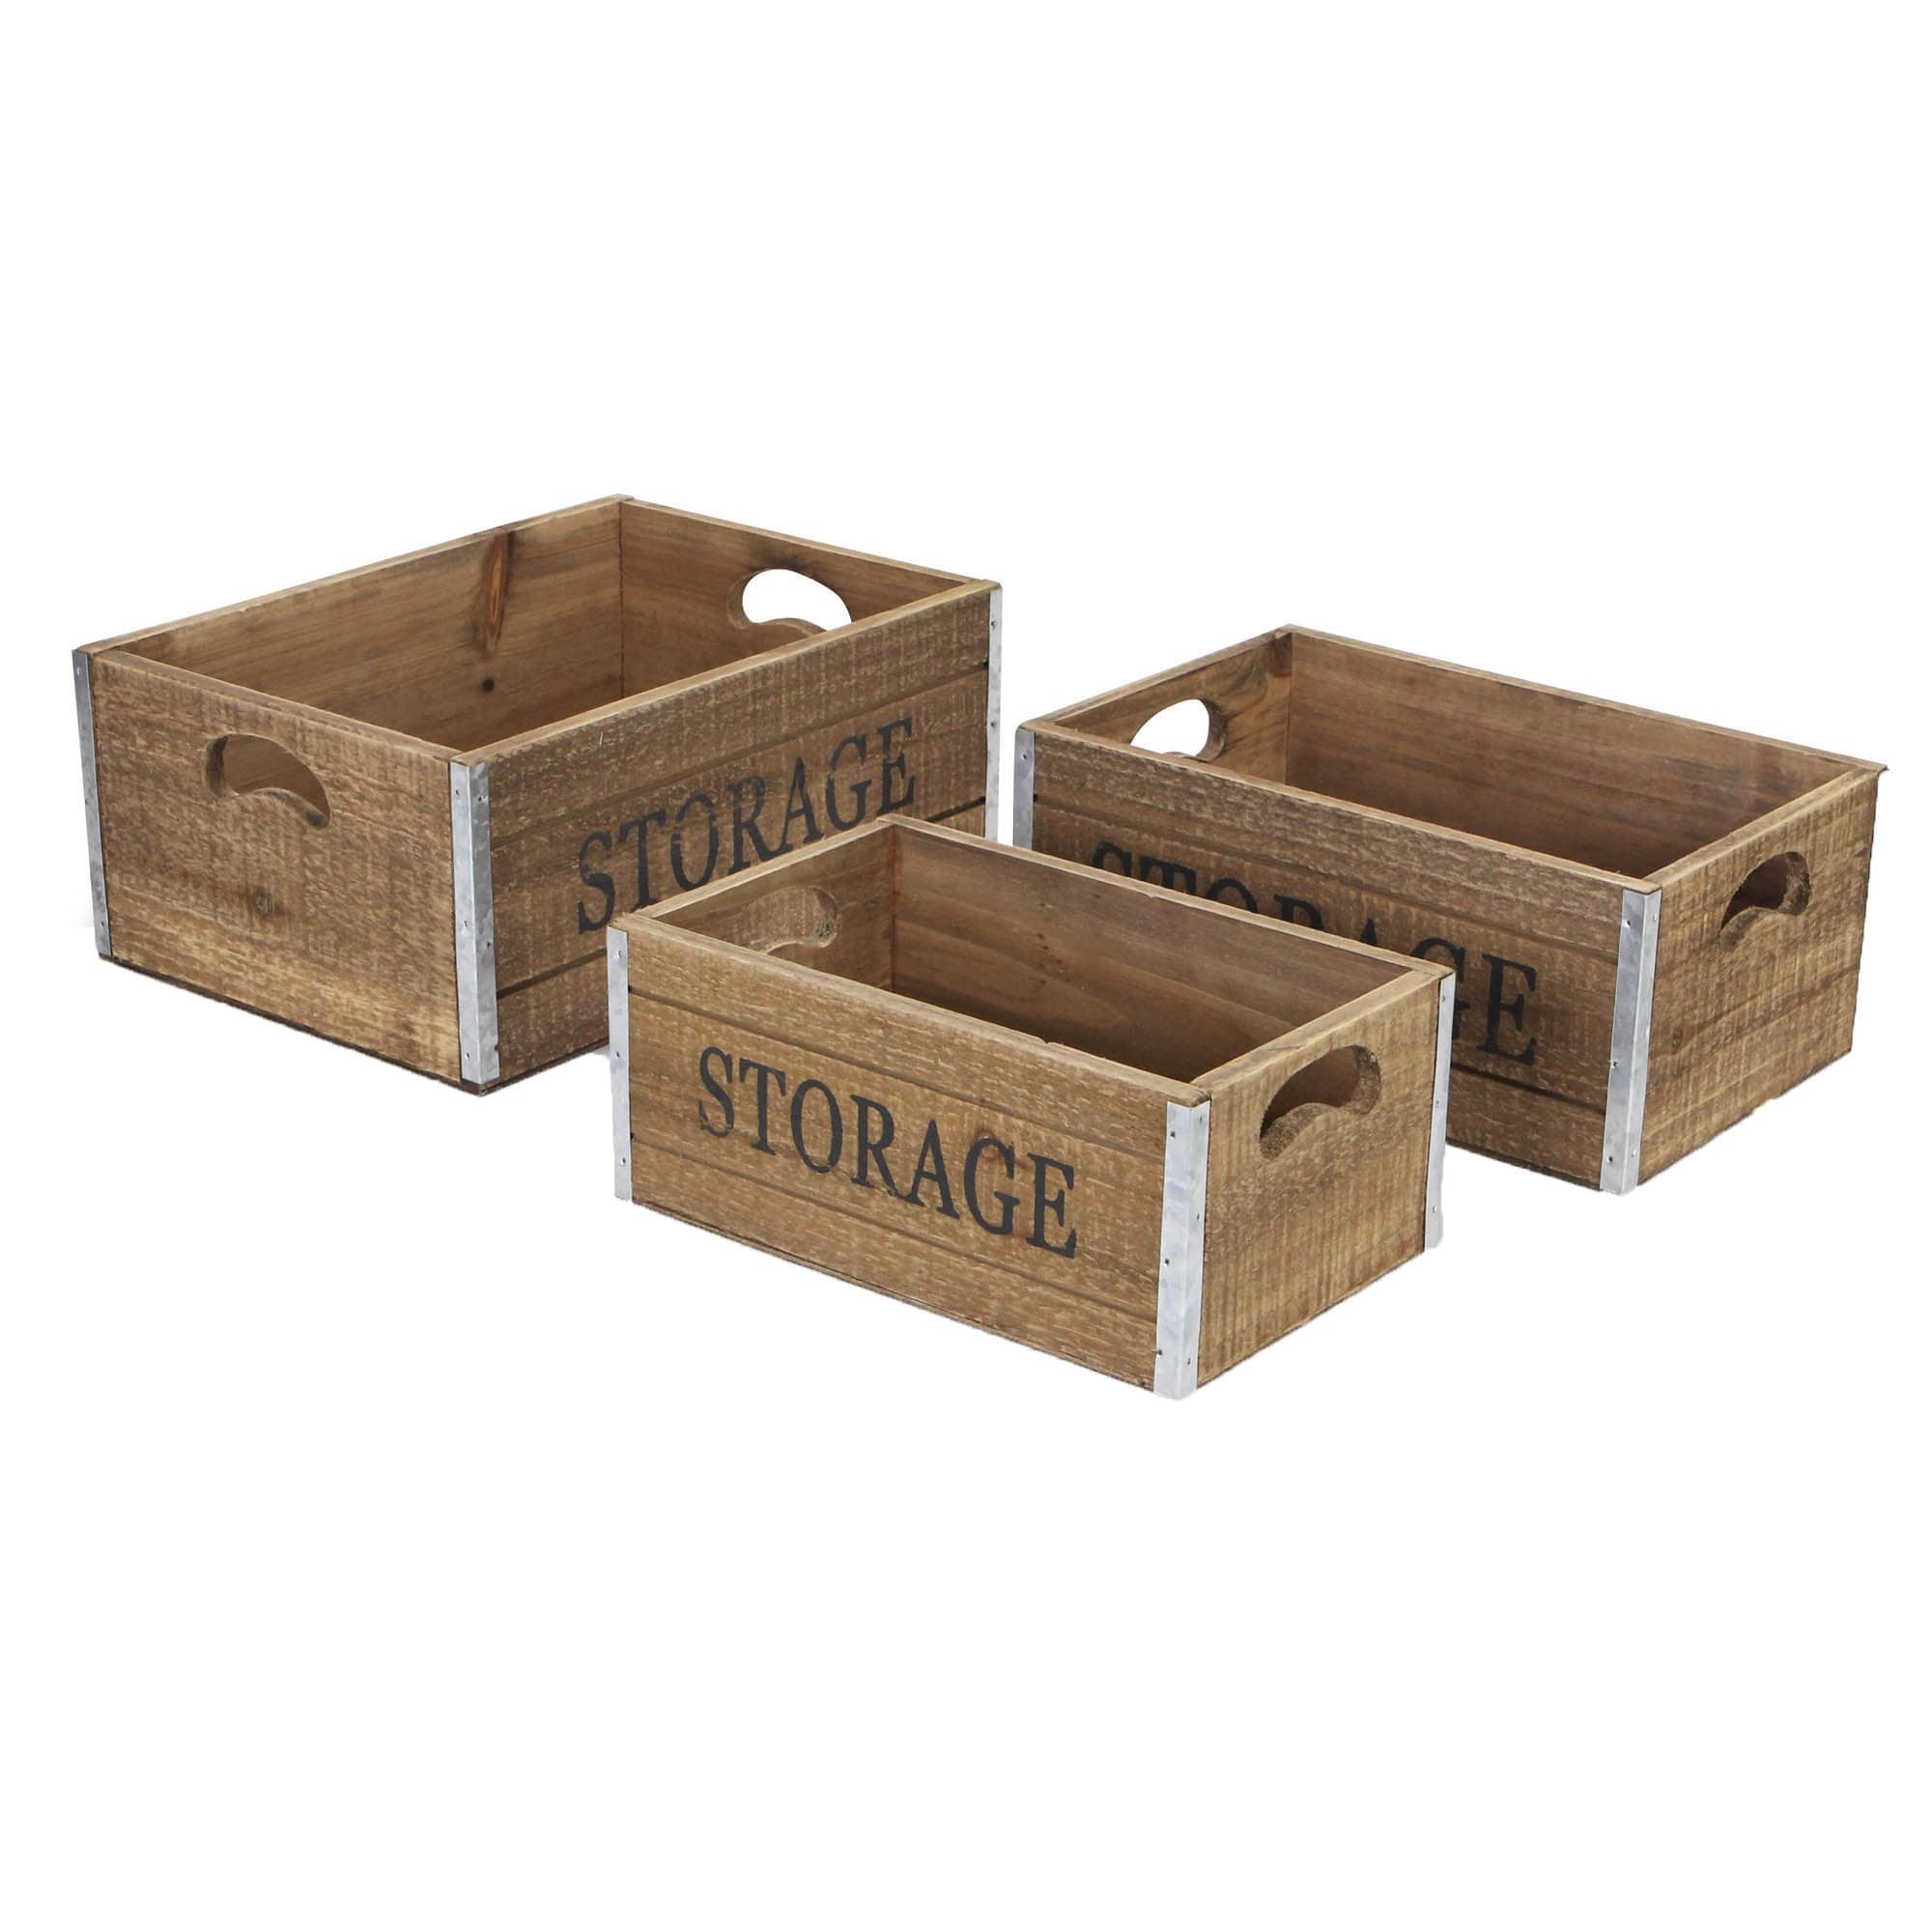 https://ak1.ostkcdn.com/images/products/is/images/direct/5eac846e689119a8f449b091c6726228c0e0b917/Cheungs-Set-of-3-Wooden-Storage-Crates-With-Metal-Border-Accents.jpg